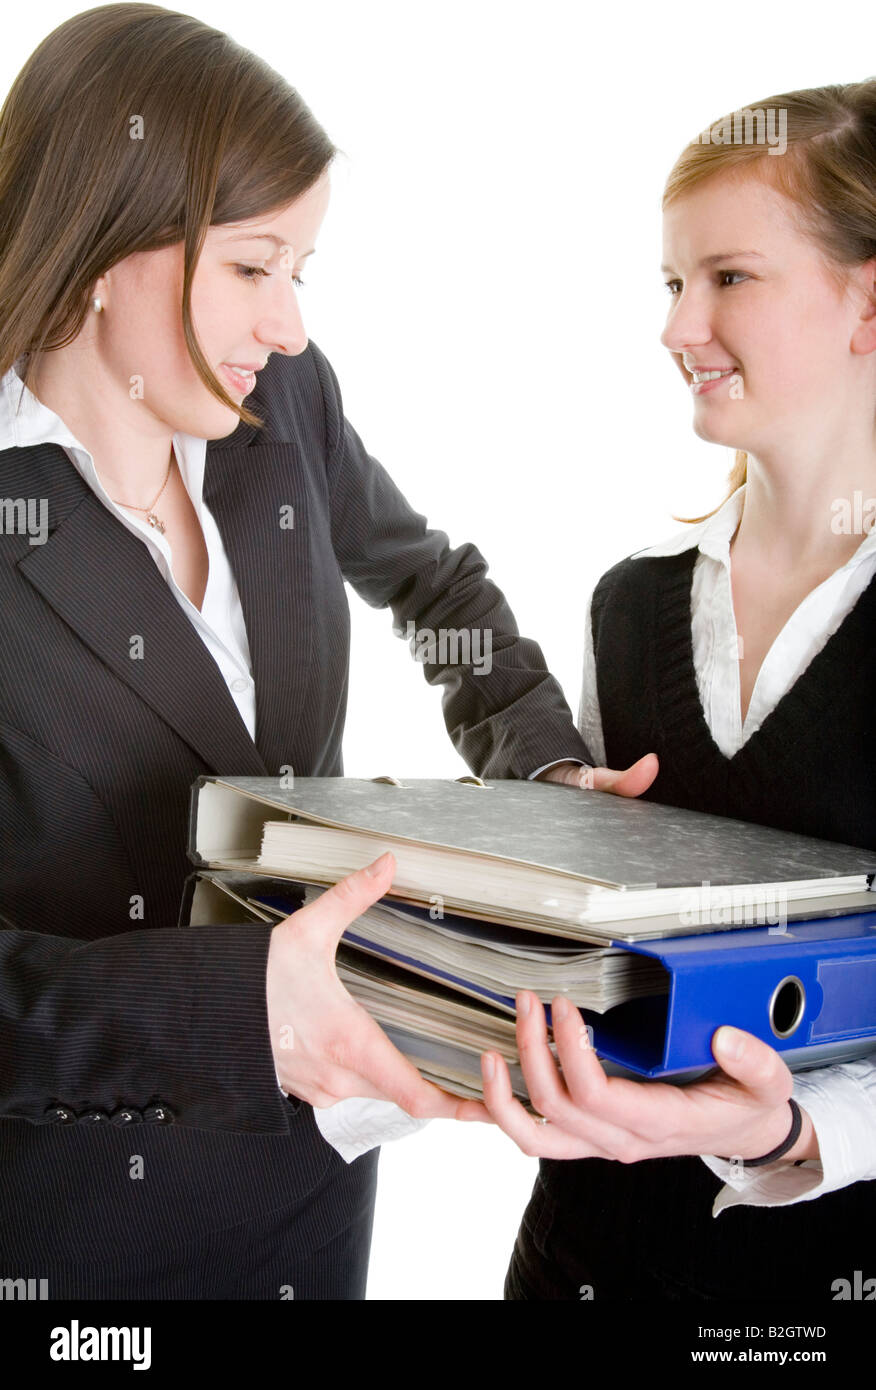 assistants office document file business women managers young businesswomen tradeswomen secretary clerks pair Stock Photo